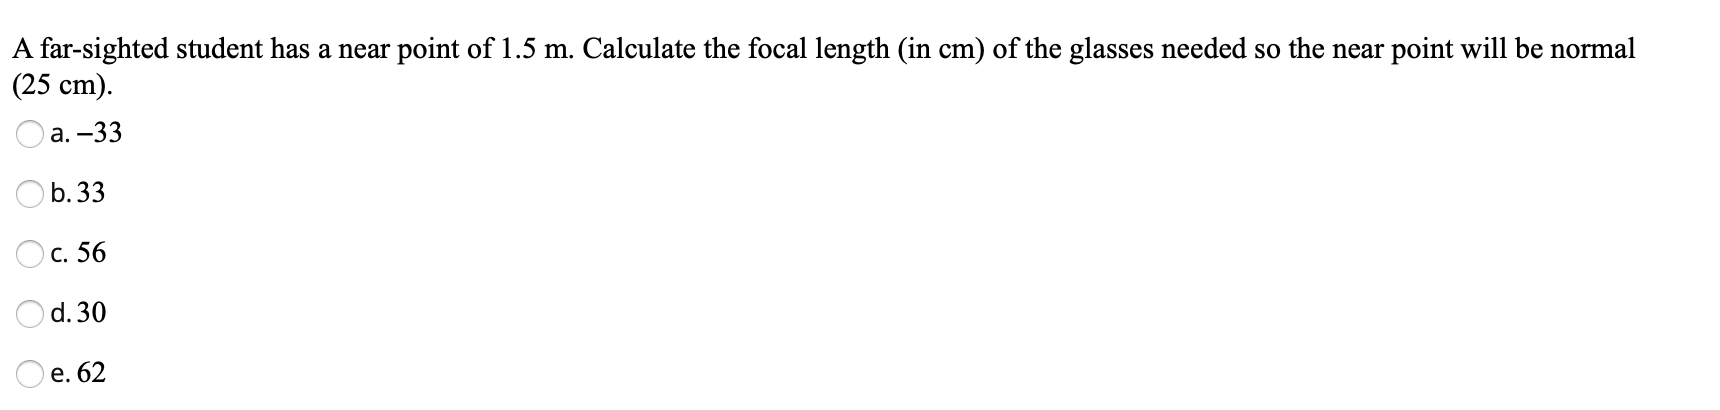 A far-sighted student has a near point of 1.5 m. Calculate the focal length (in cm) of the glasses needed so the near point will be normal
(25 ст).
